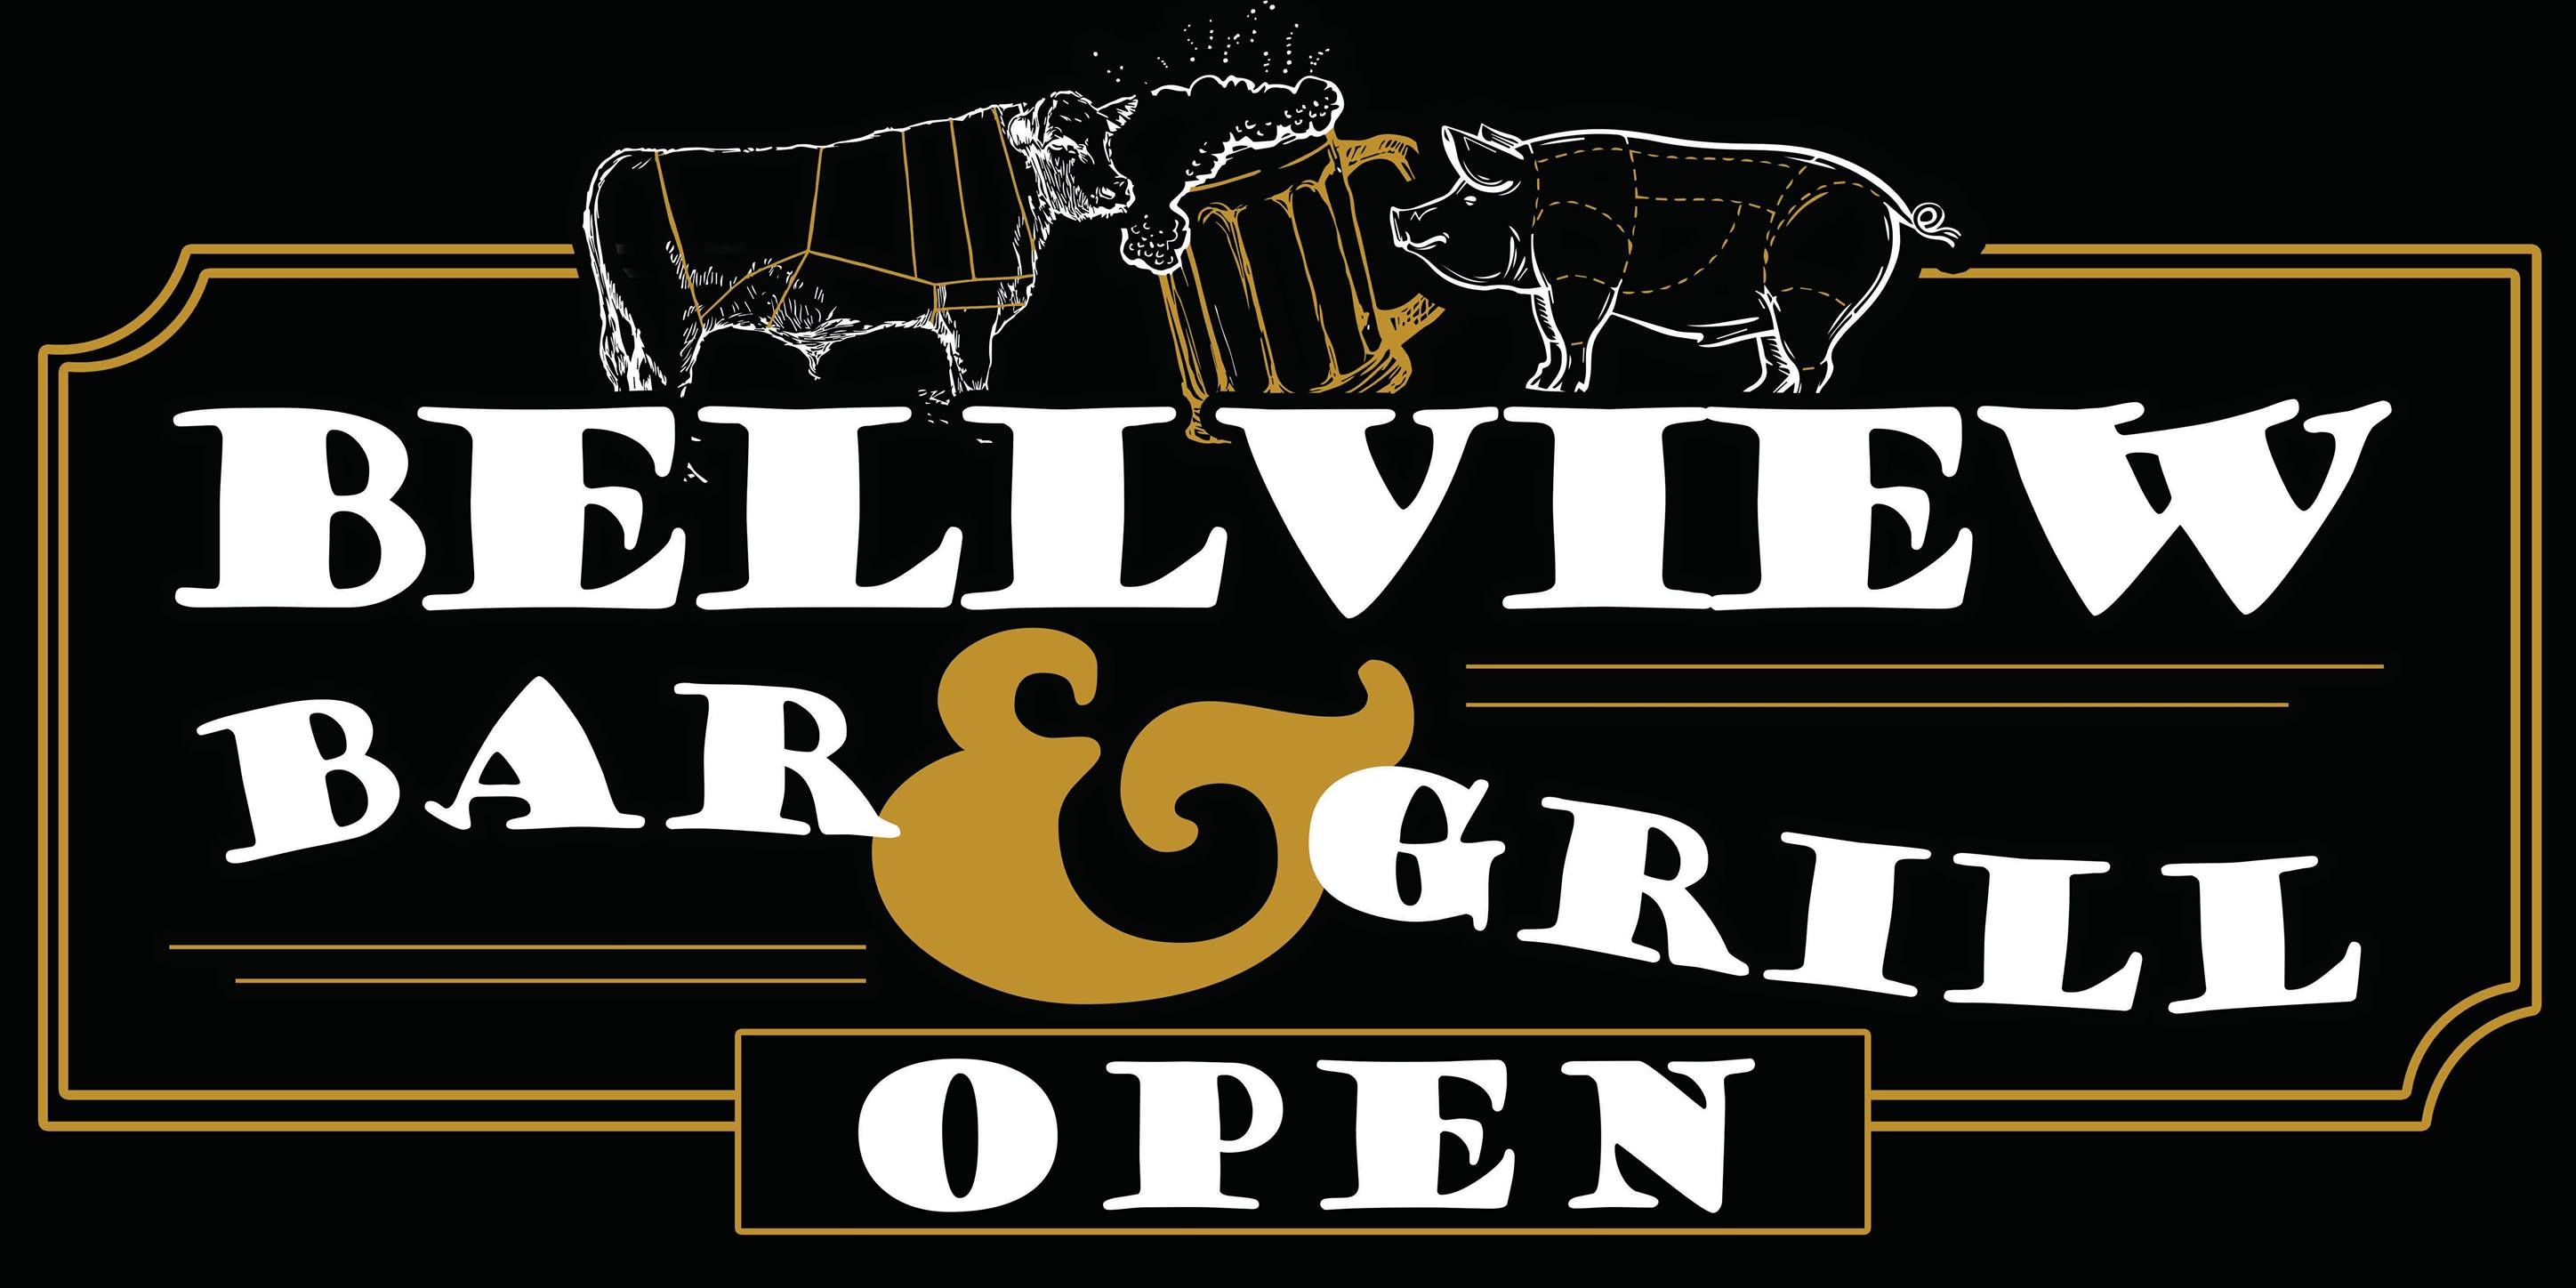 Get (2) $25 gift certificates to Bellview Bar and Grill for only $25!